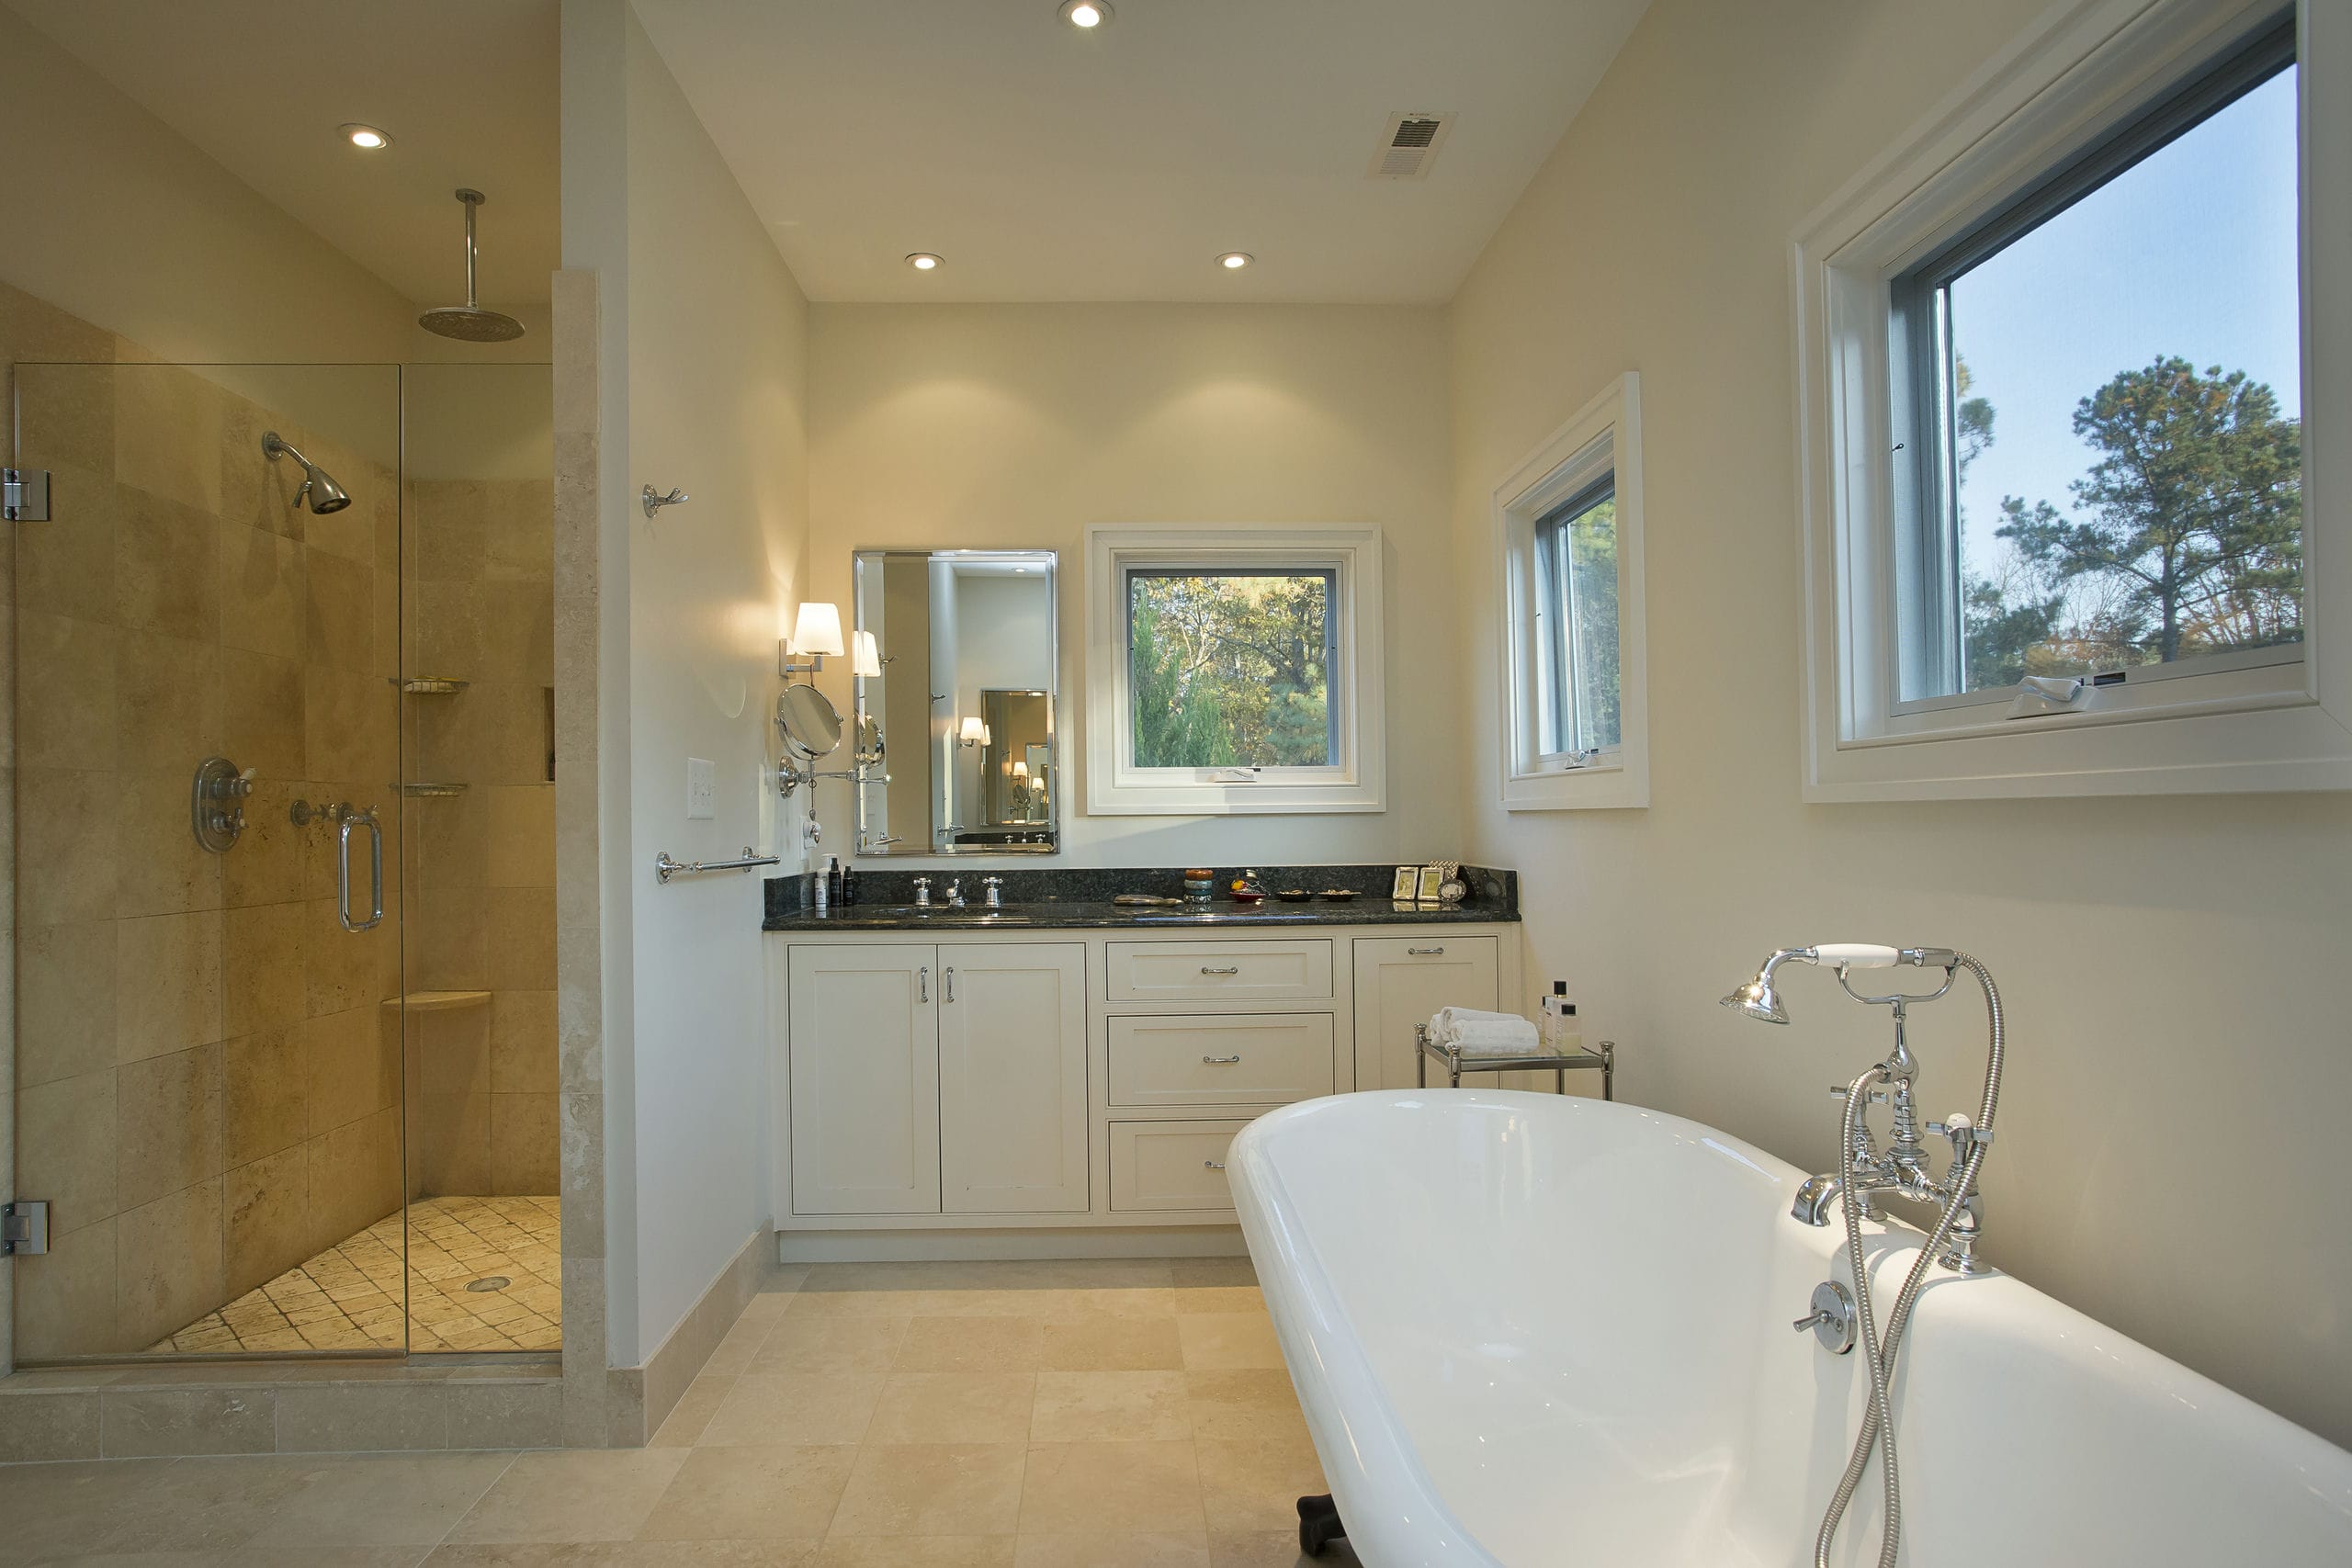 Primary bathroom with spacious shower, clawfoot tub, and separate vanities with inset cabinets